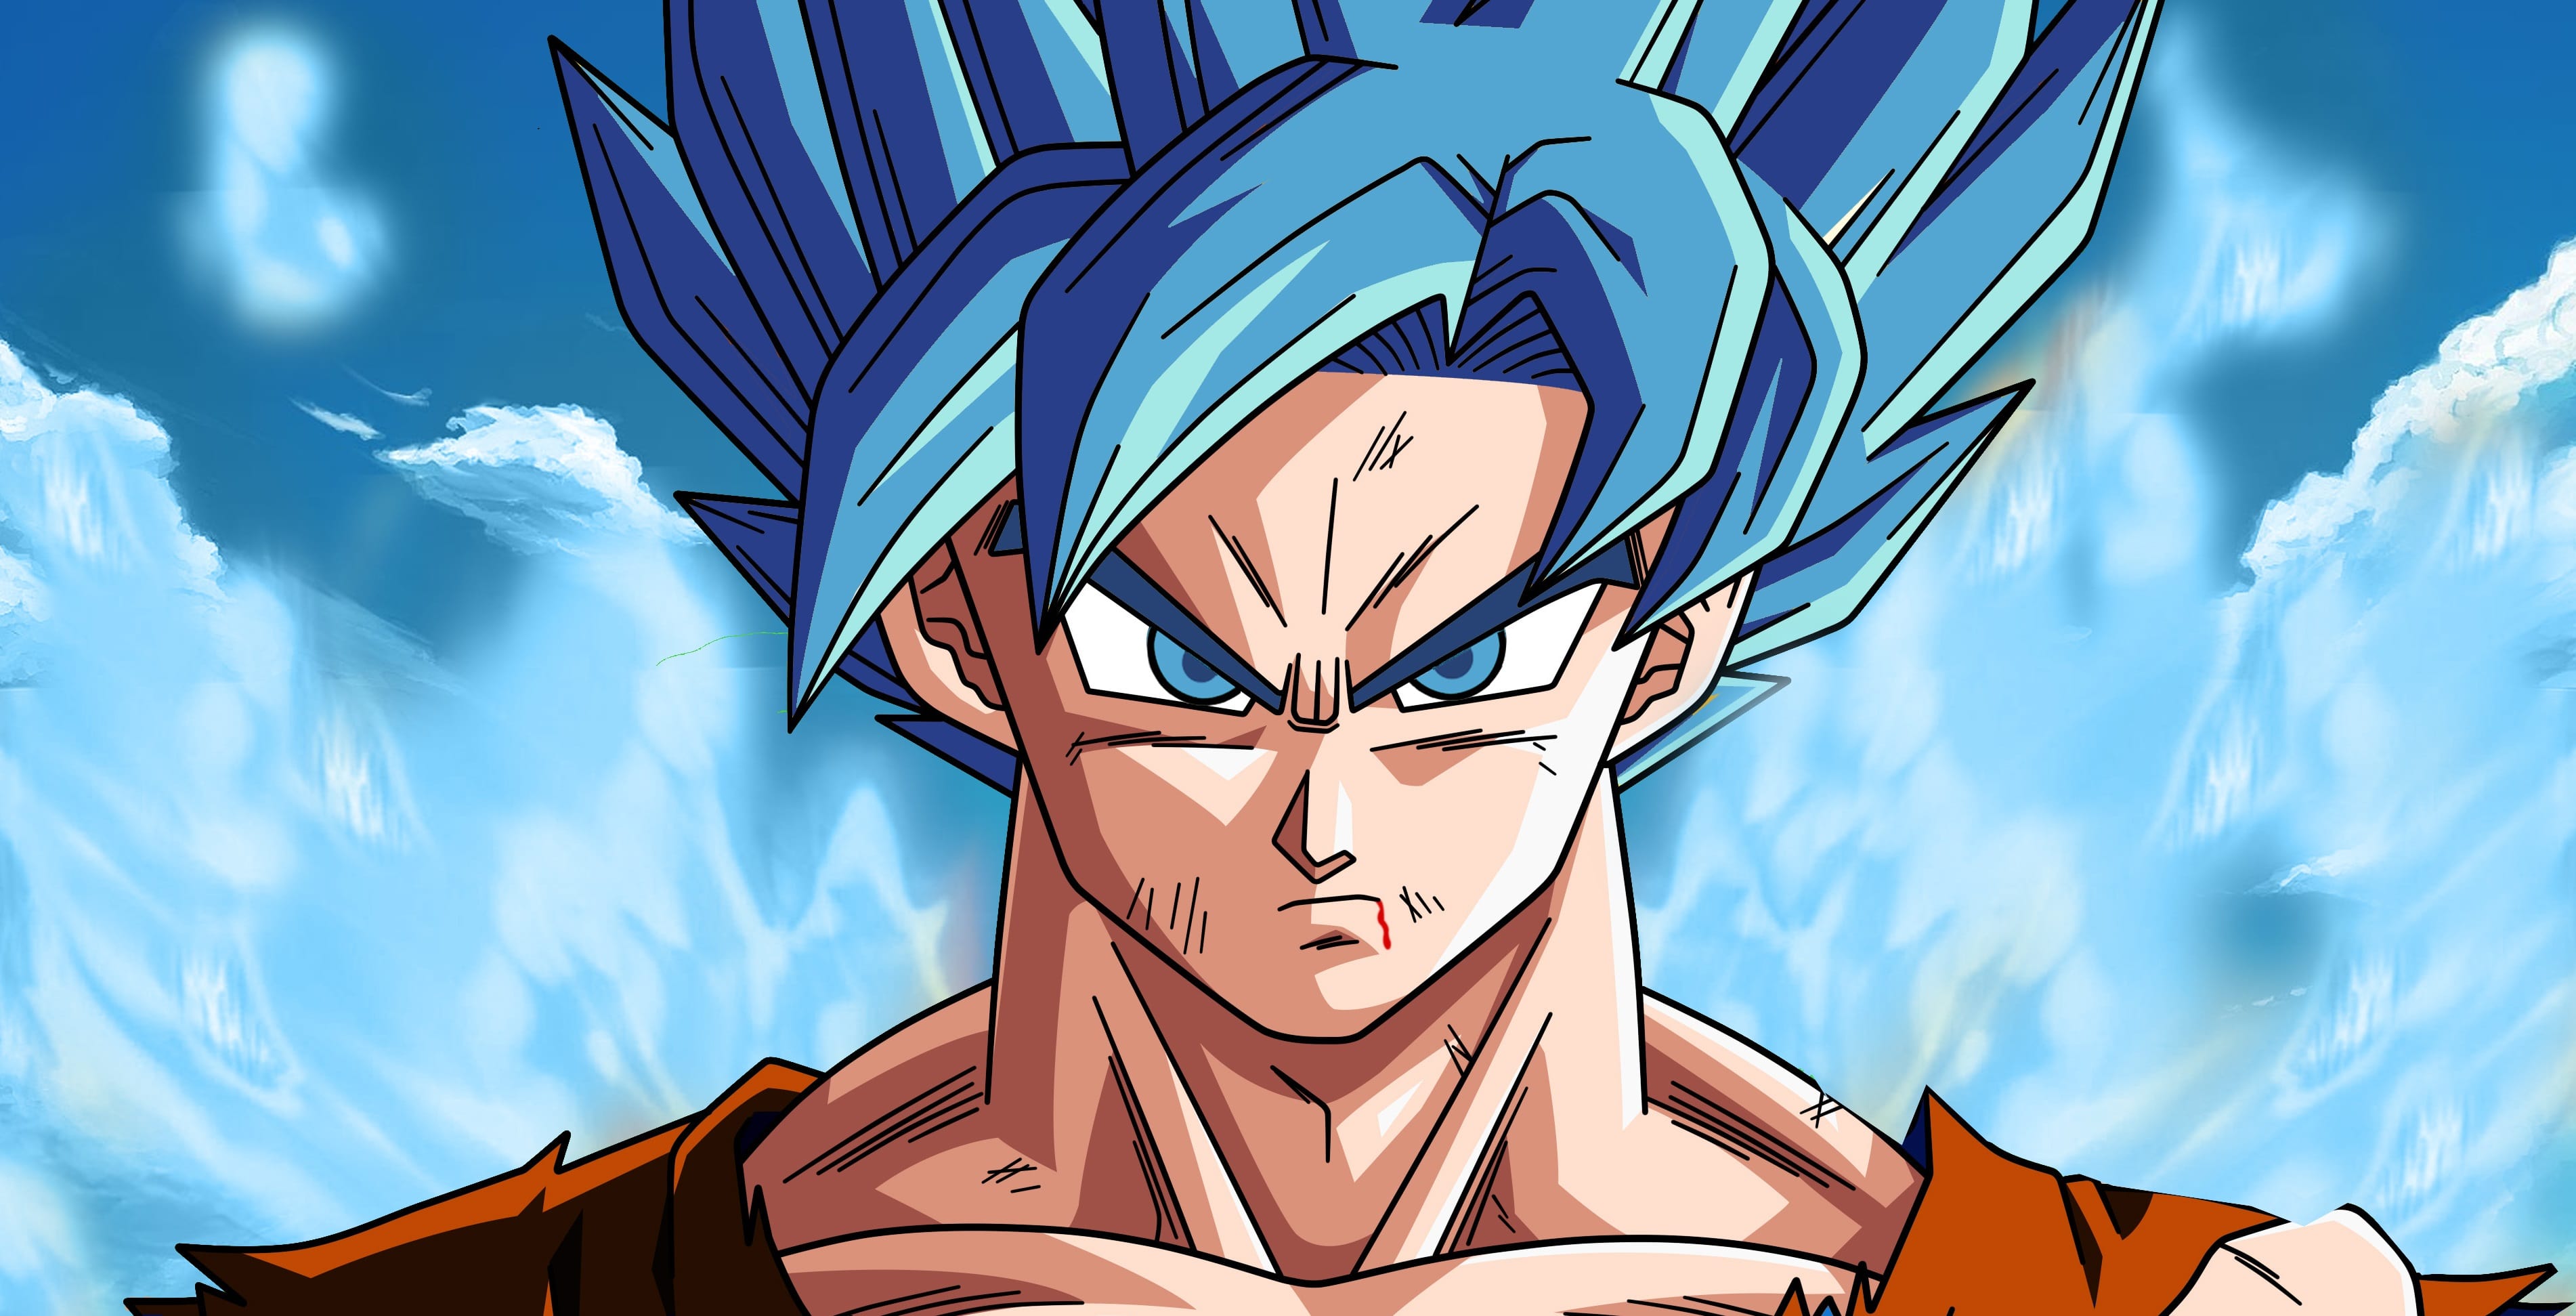 10 Outstanding 4k wallpaper goku You Can Get It Free Of Charge